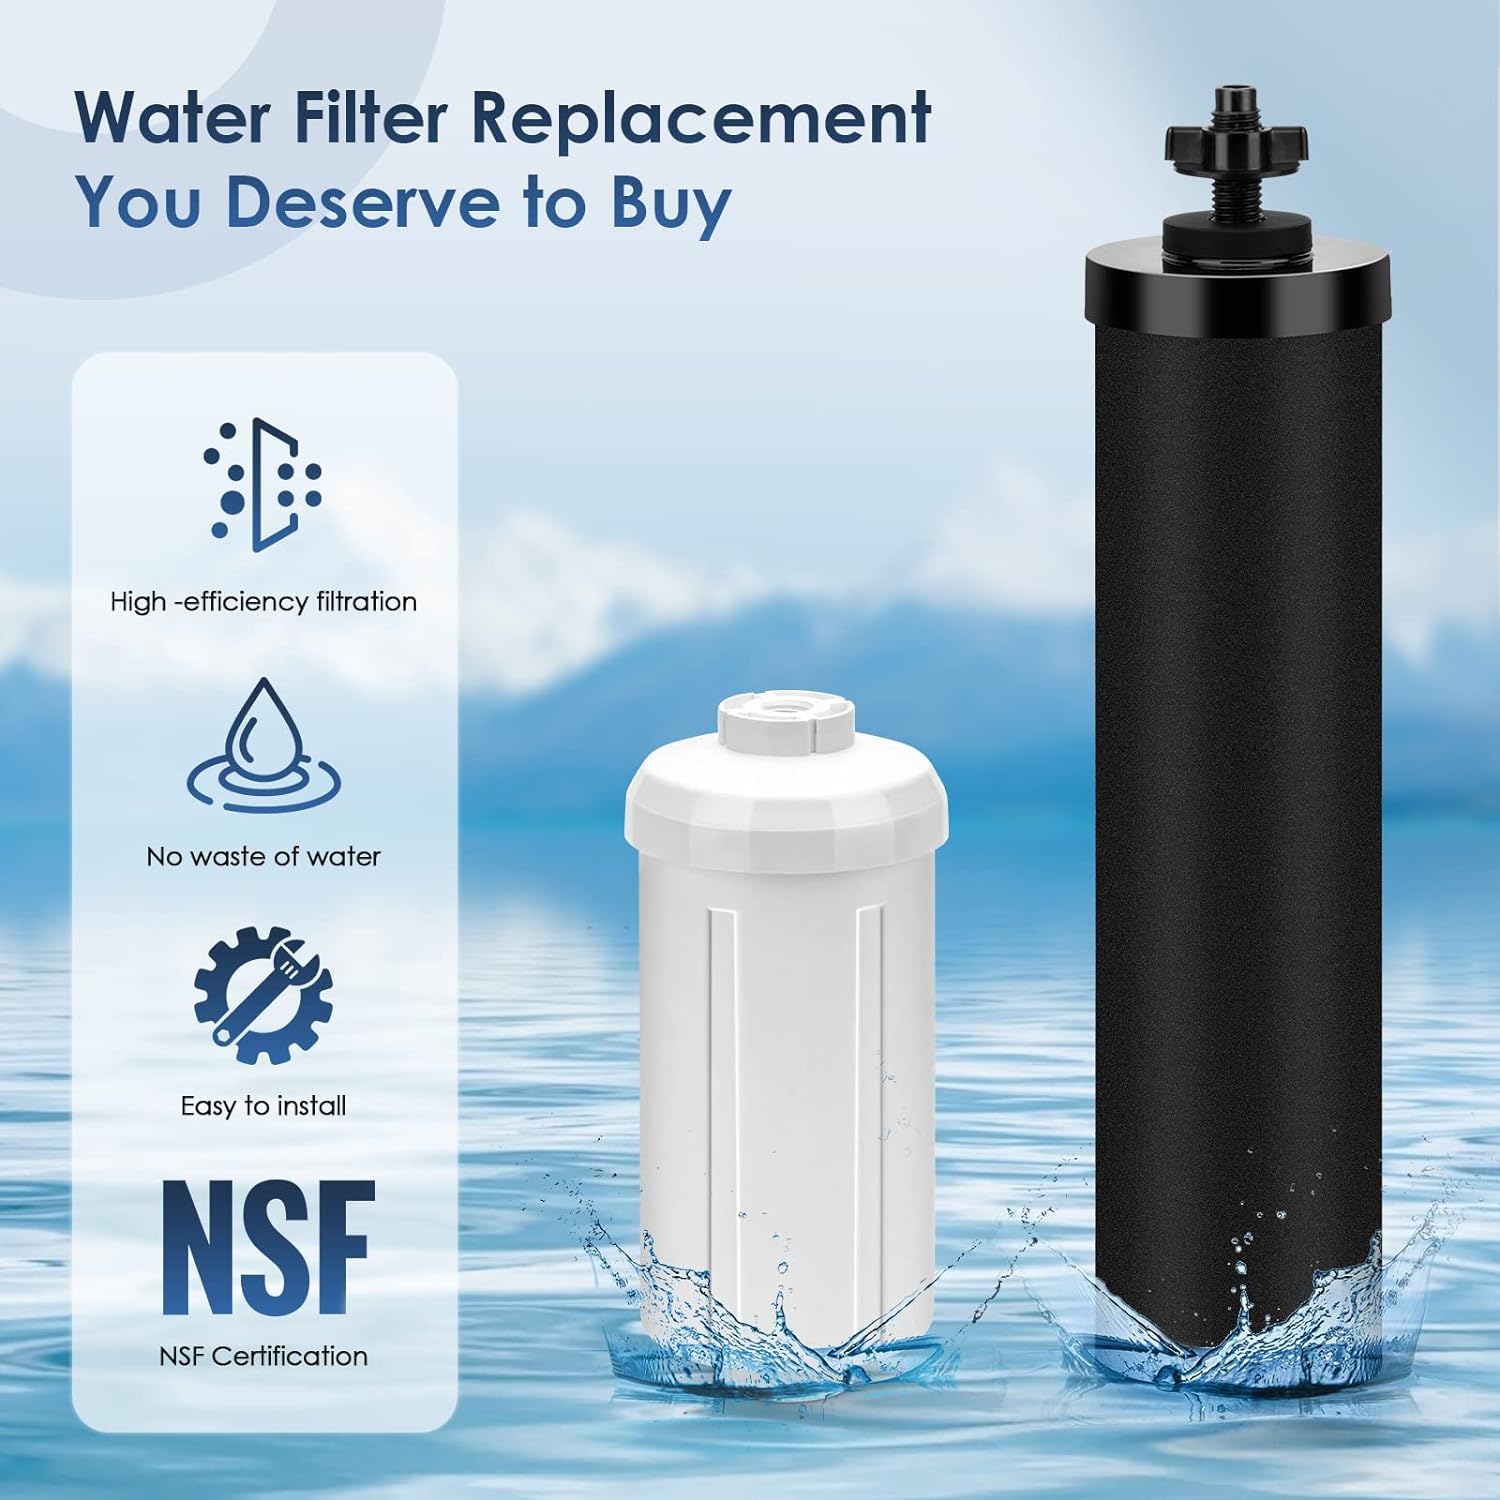 Kainasch Water Filter Replacement for Berkey, Black Activated Carbon Filters Compatible with Berkey Big, Light, Imperial, Travel, Crown, Royal Series Gravity-Fed Water Filter System(Pack of 2)